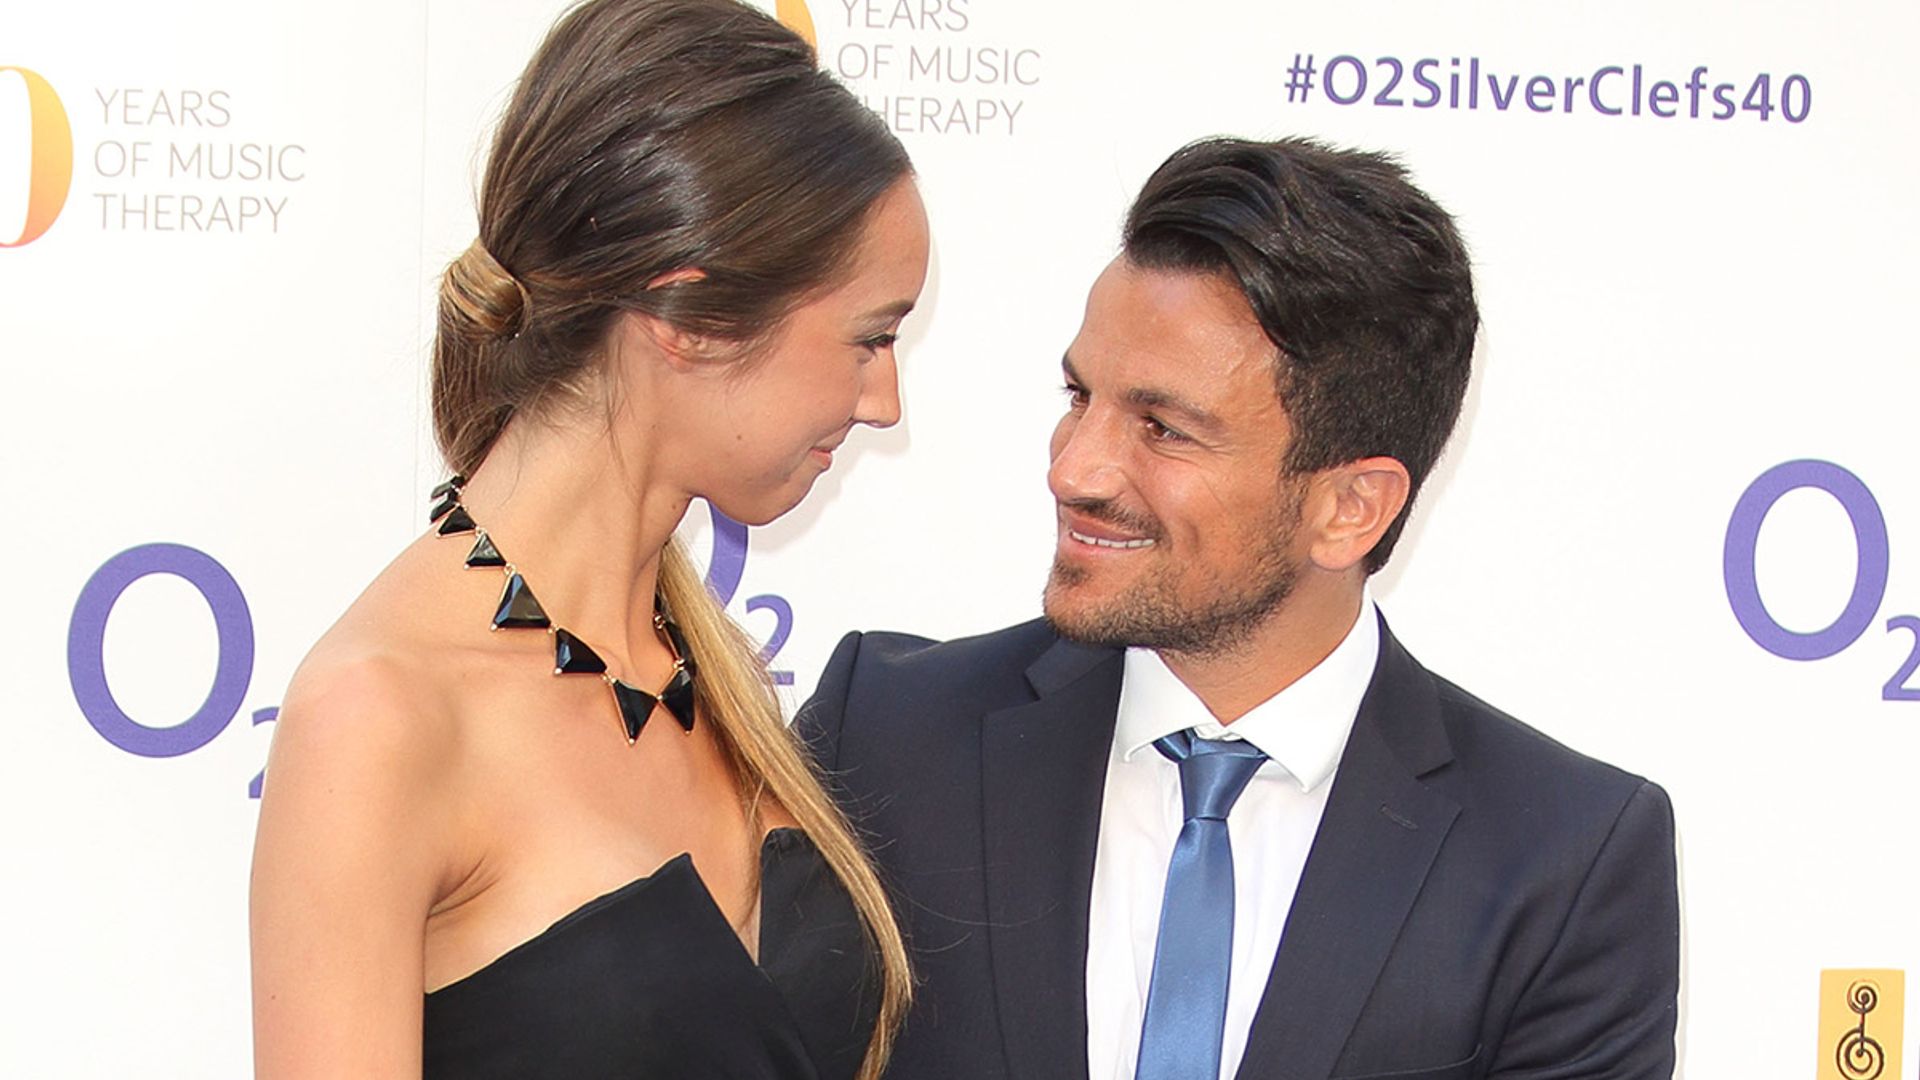 Peter Andre gives update on fifth baby plans with wife Emily McDonagh